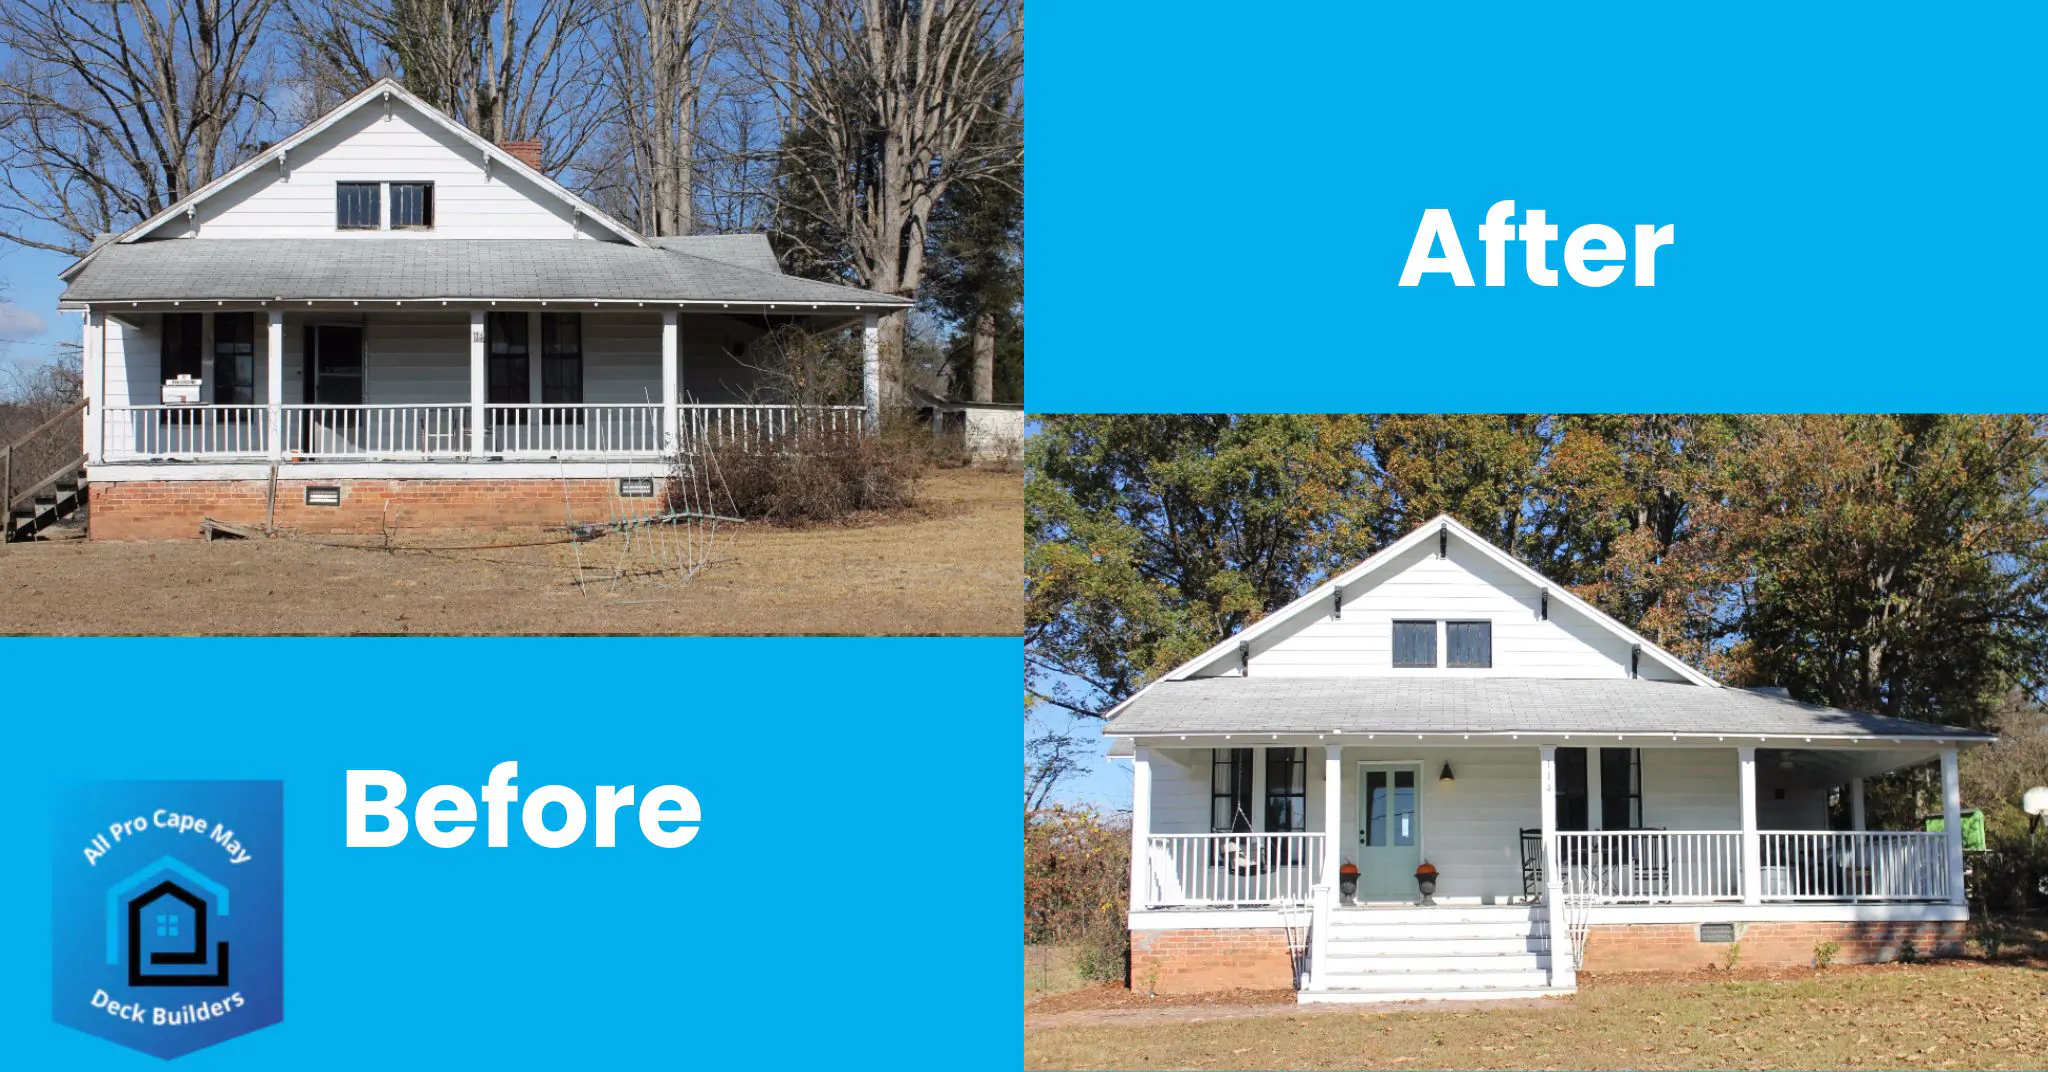 Before and After Porch Design Service - All Pro Cape May Deck Builders